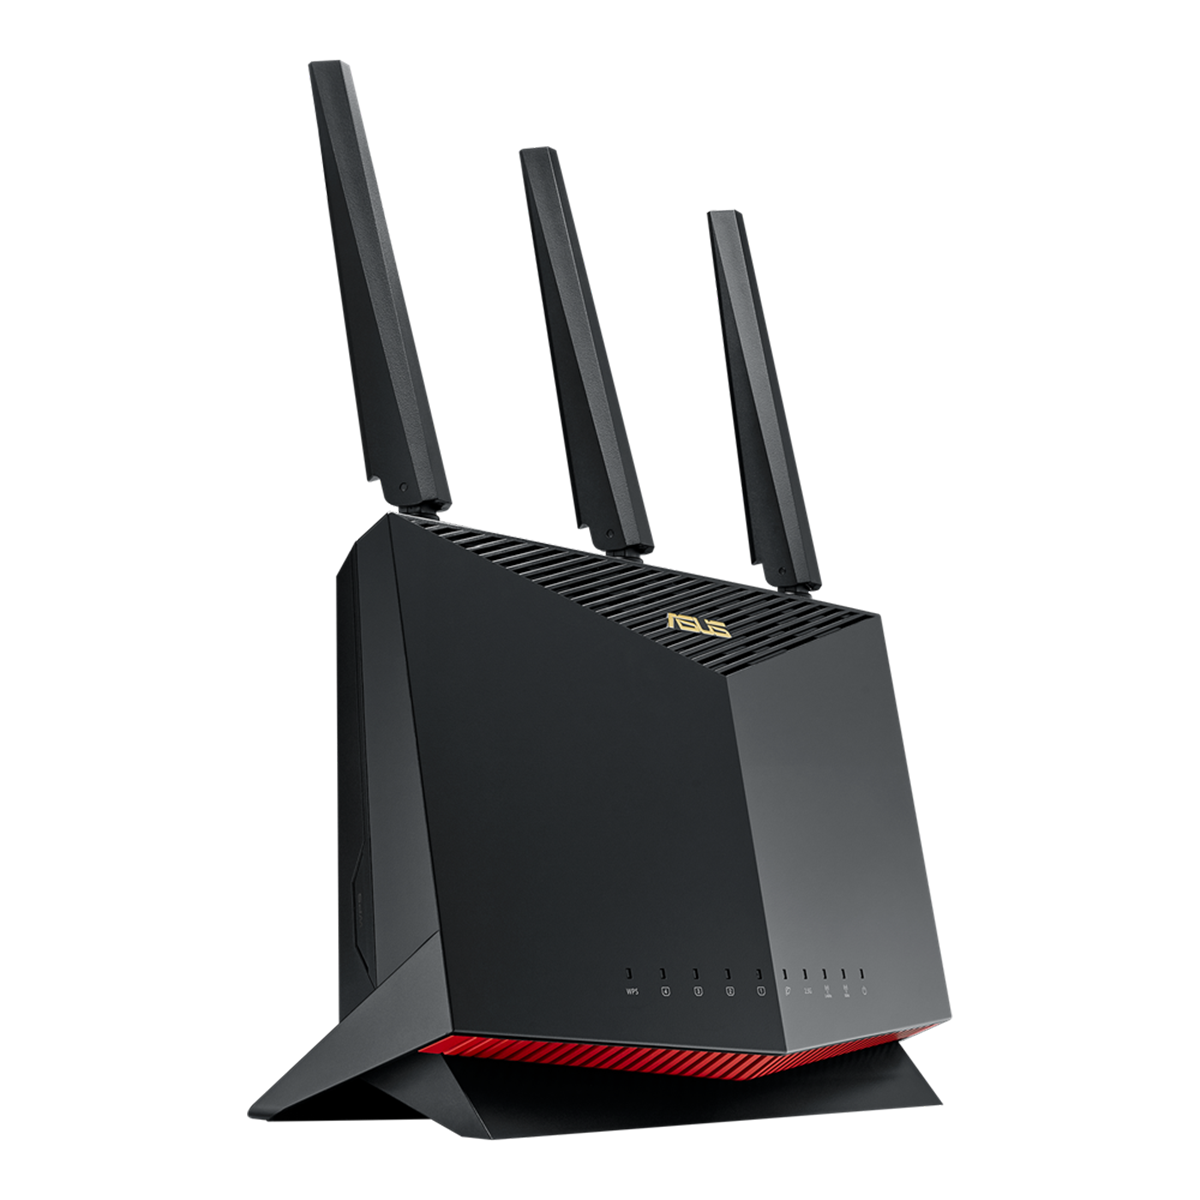 ASUS RT-AX86U/RT-AX86S AX5700 Dual Band WiFi 6 Gaming Router with AiMesh Support, Parental Control, Lifetime free Internet Security USB3.2 Gen 1 Port